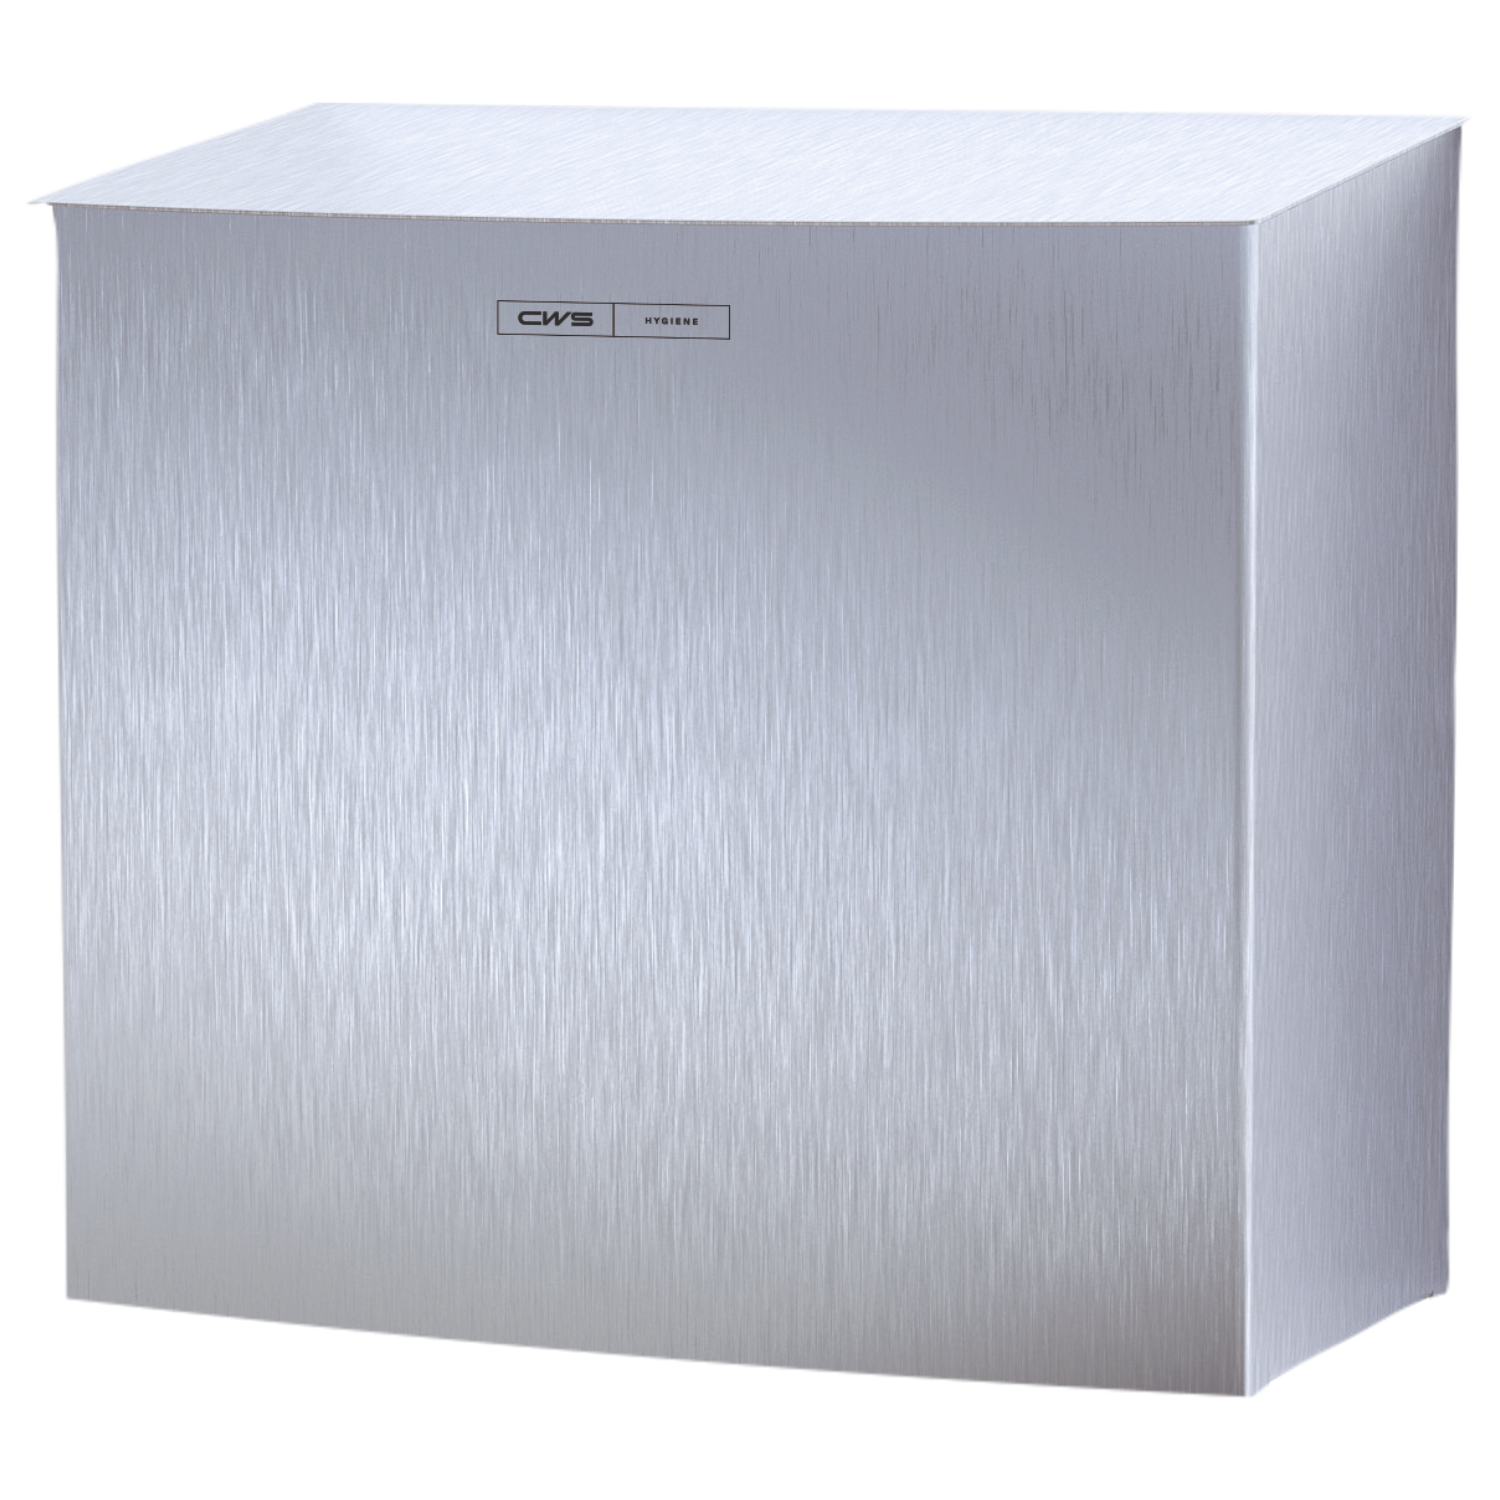 CWS Paradise Paradise Stainless Steel Hygiene Box 6 L